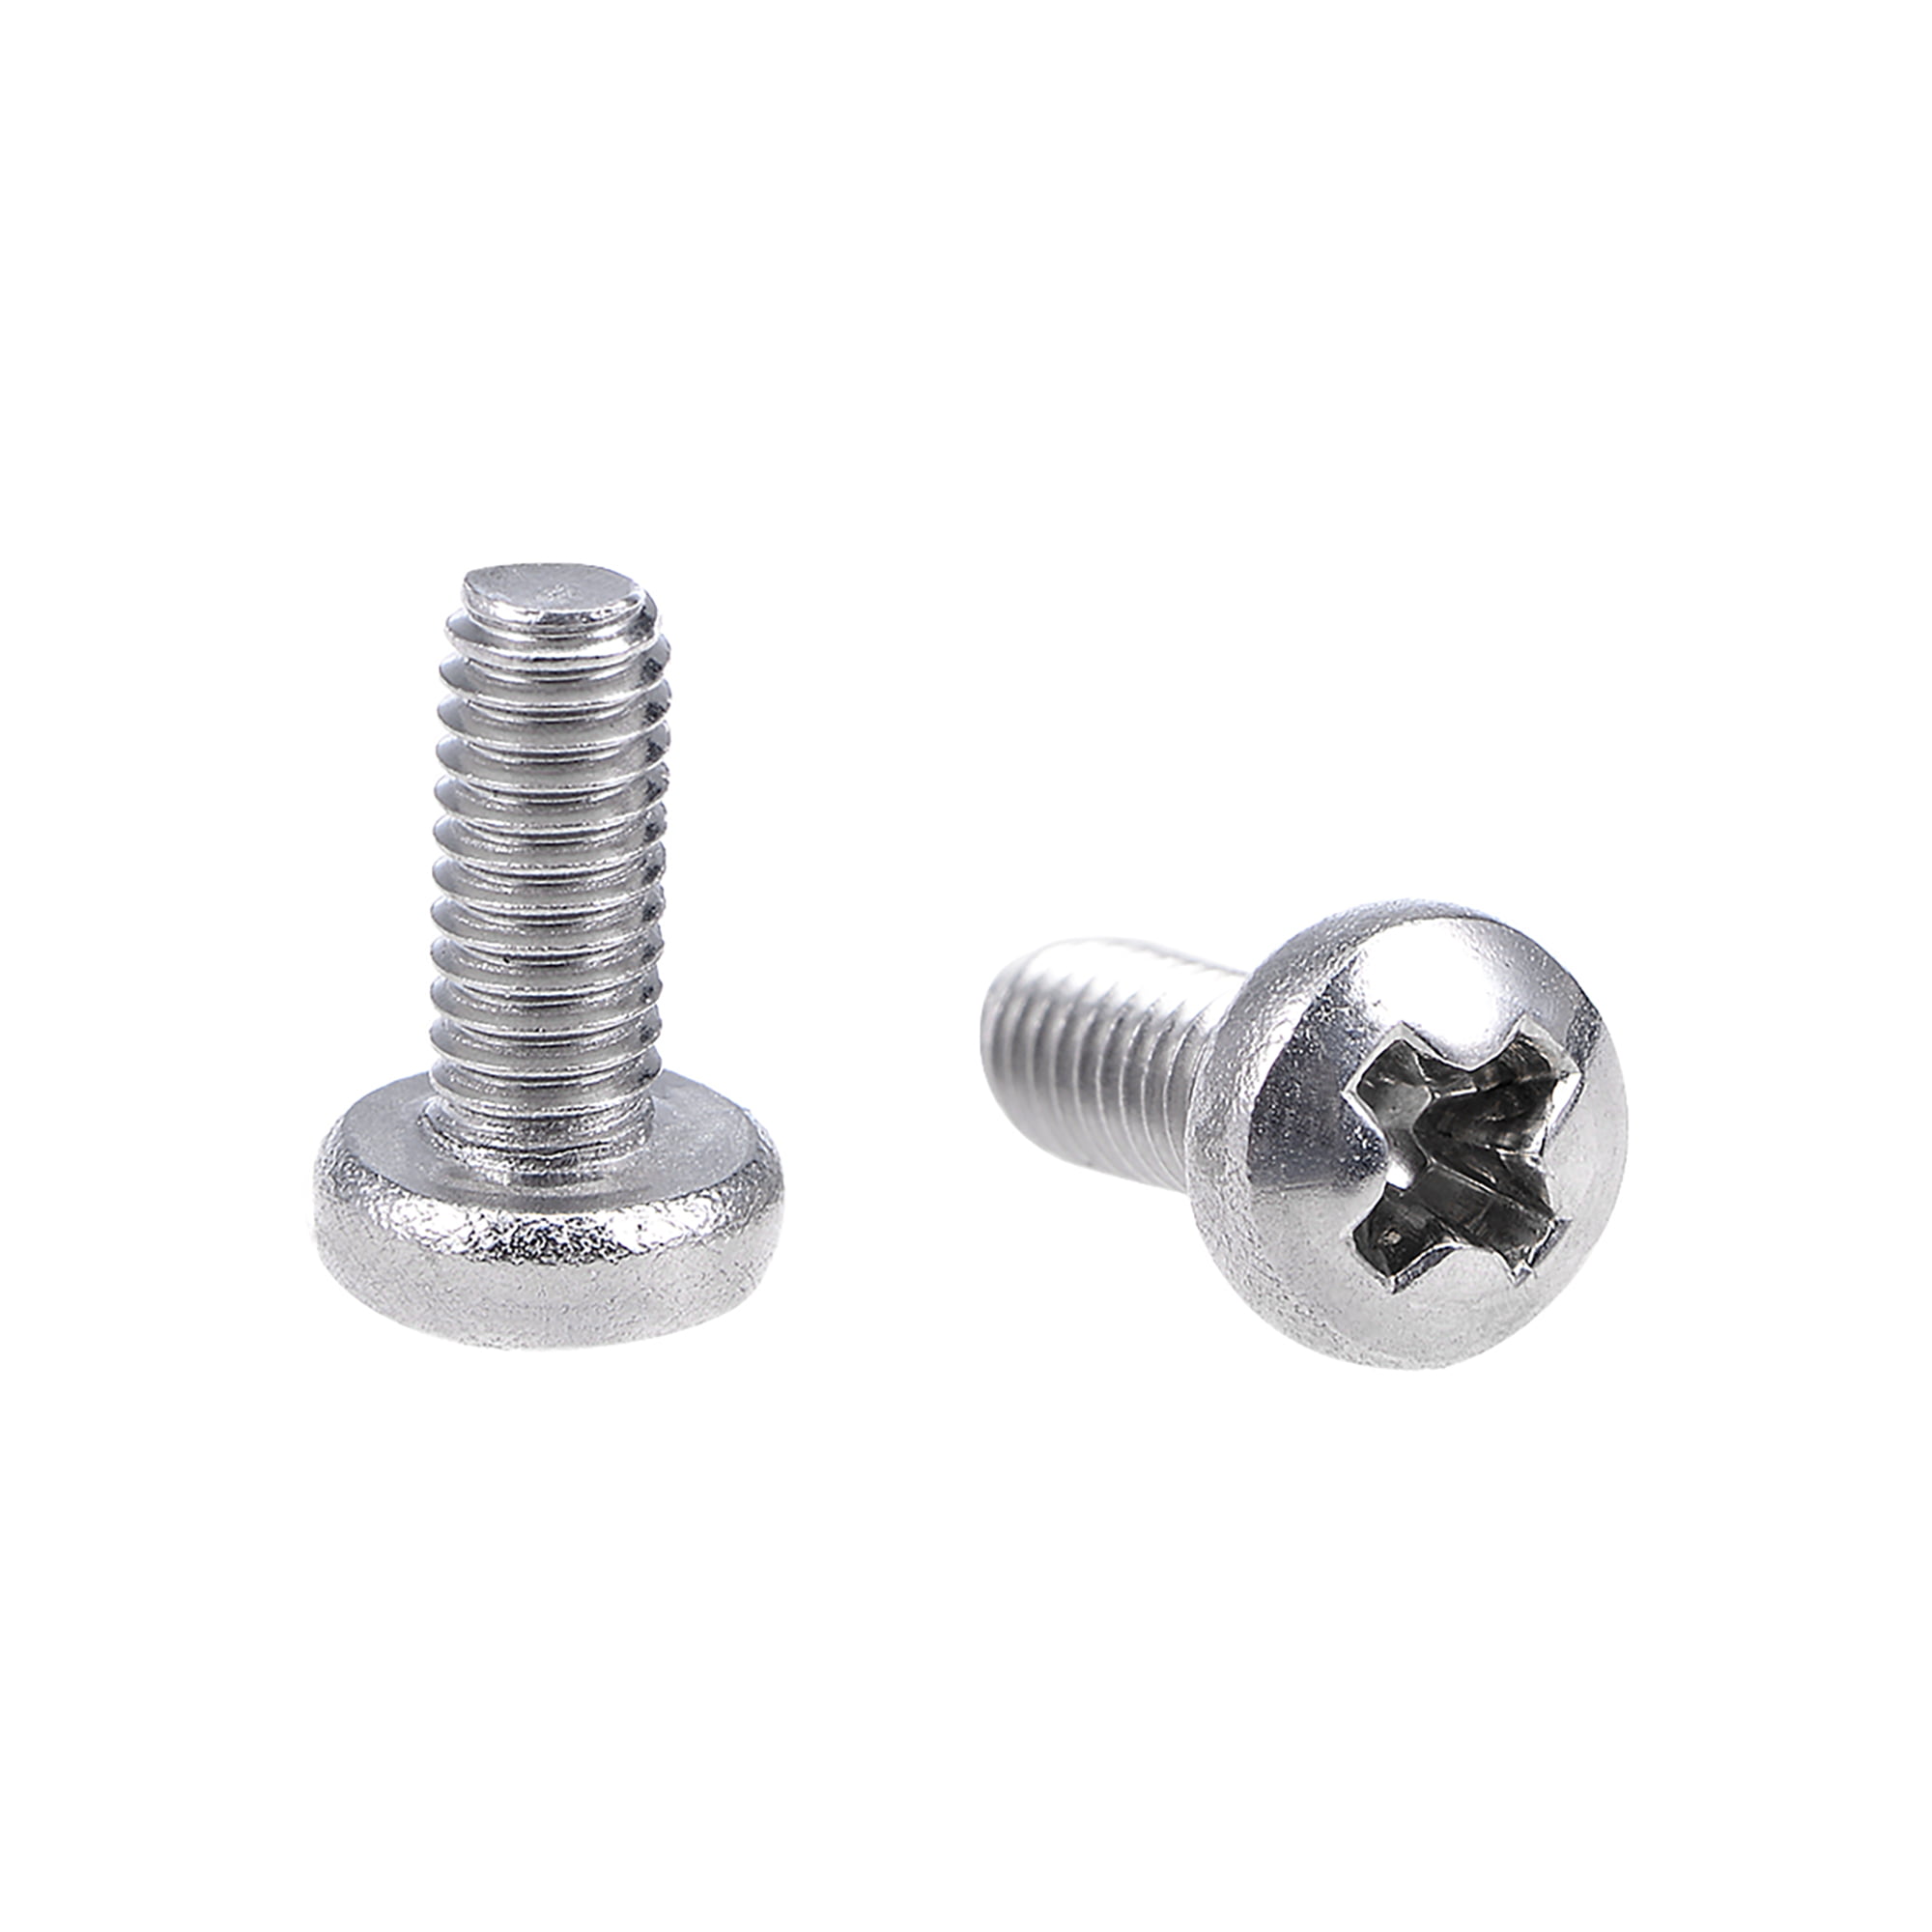 100 pcs M3 x 6mm Phillips Pan Head Screws for 2.5" HDD SSD DVD-ROM Motherboard 